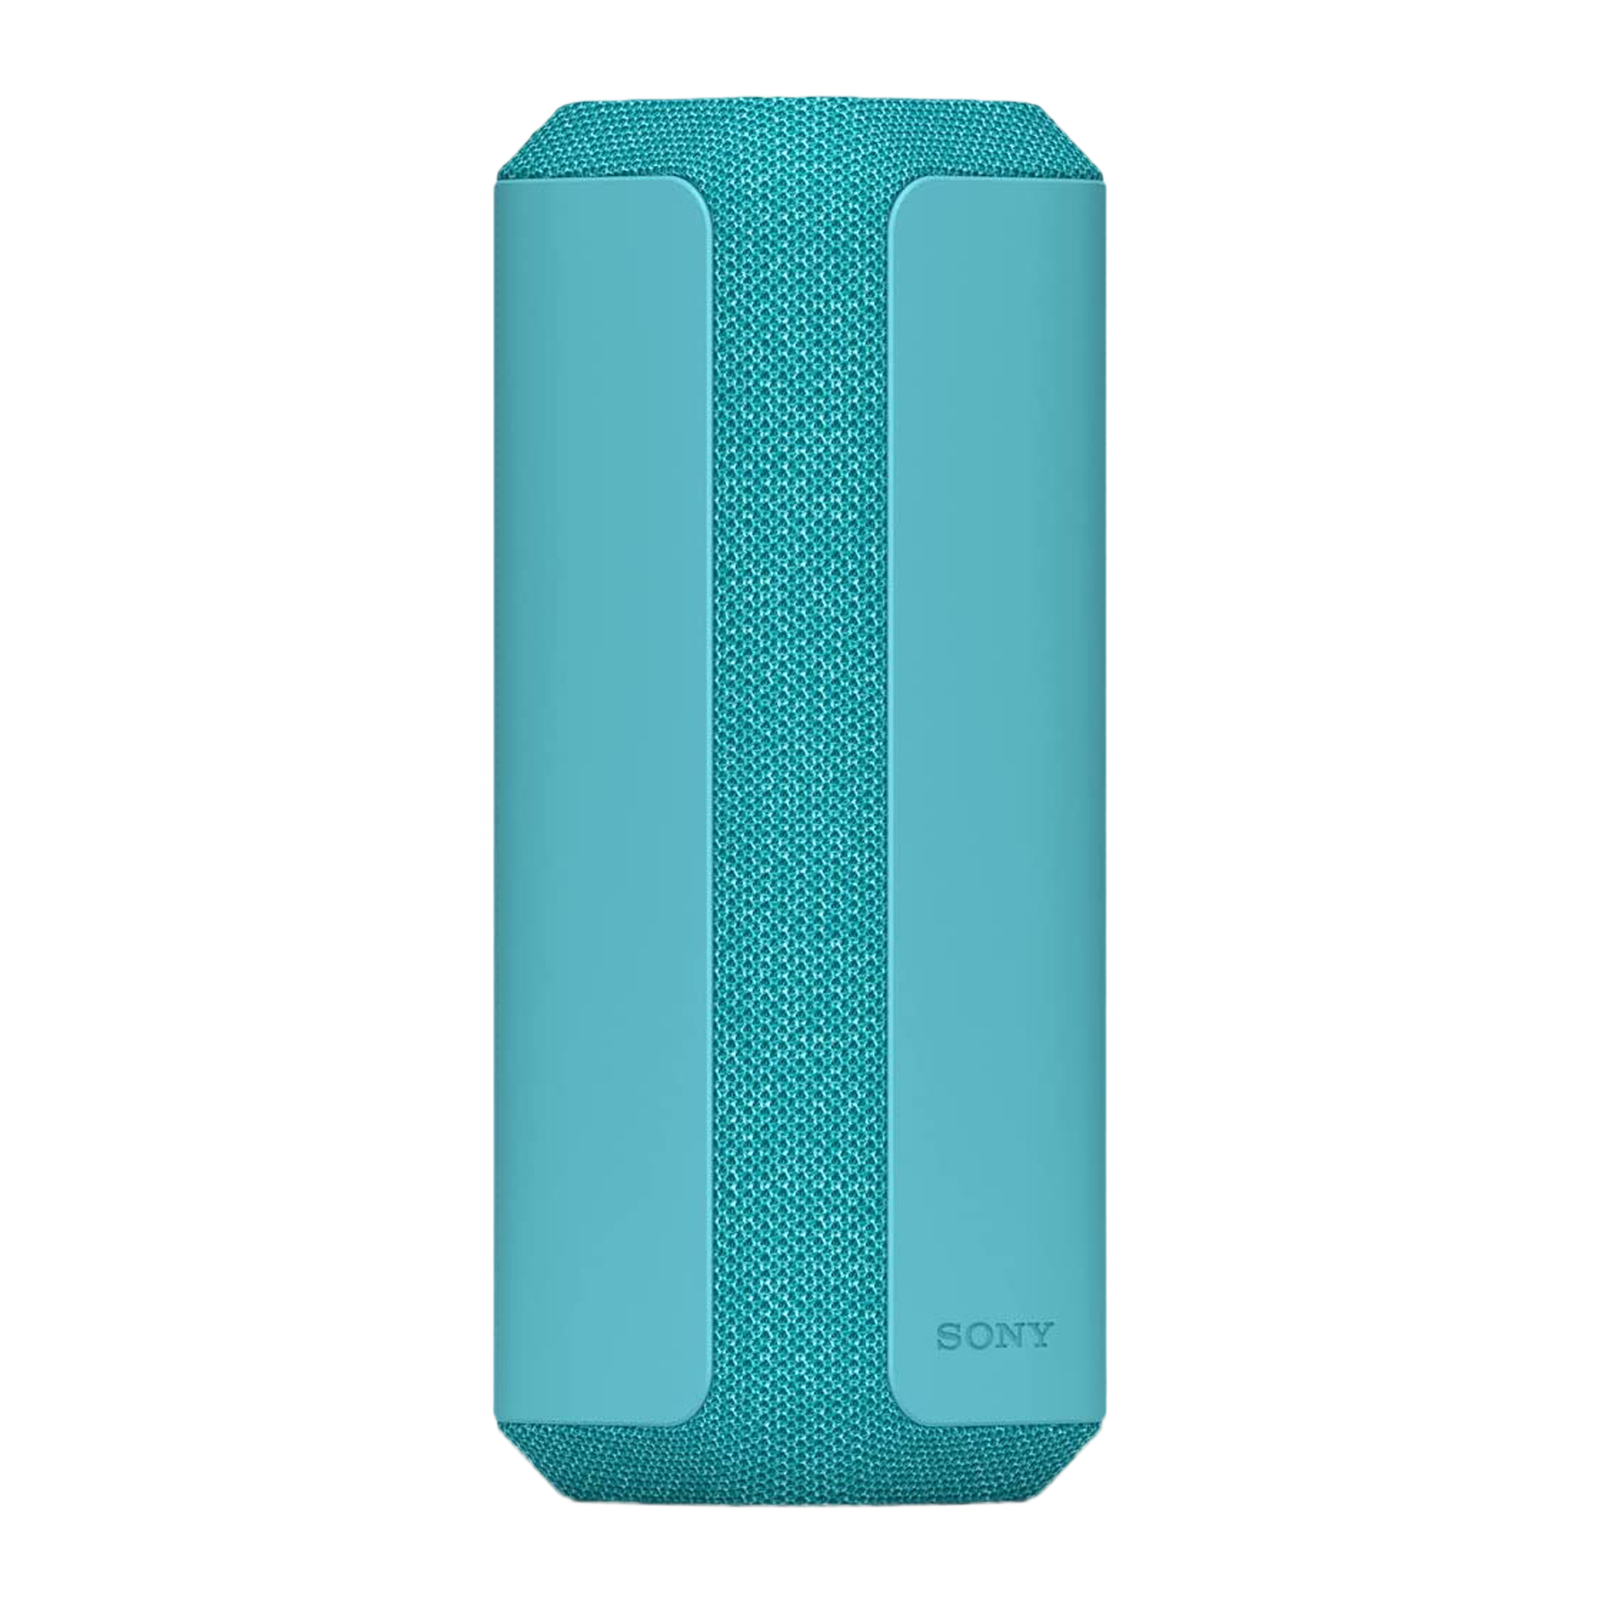 SONY X-Series 7.5 Watts Portable Bluetooth Speaker (IP67 Water Resistant, X-Balanced, Stereo Channel, Blue)_1